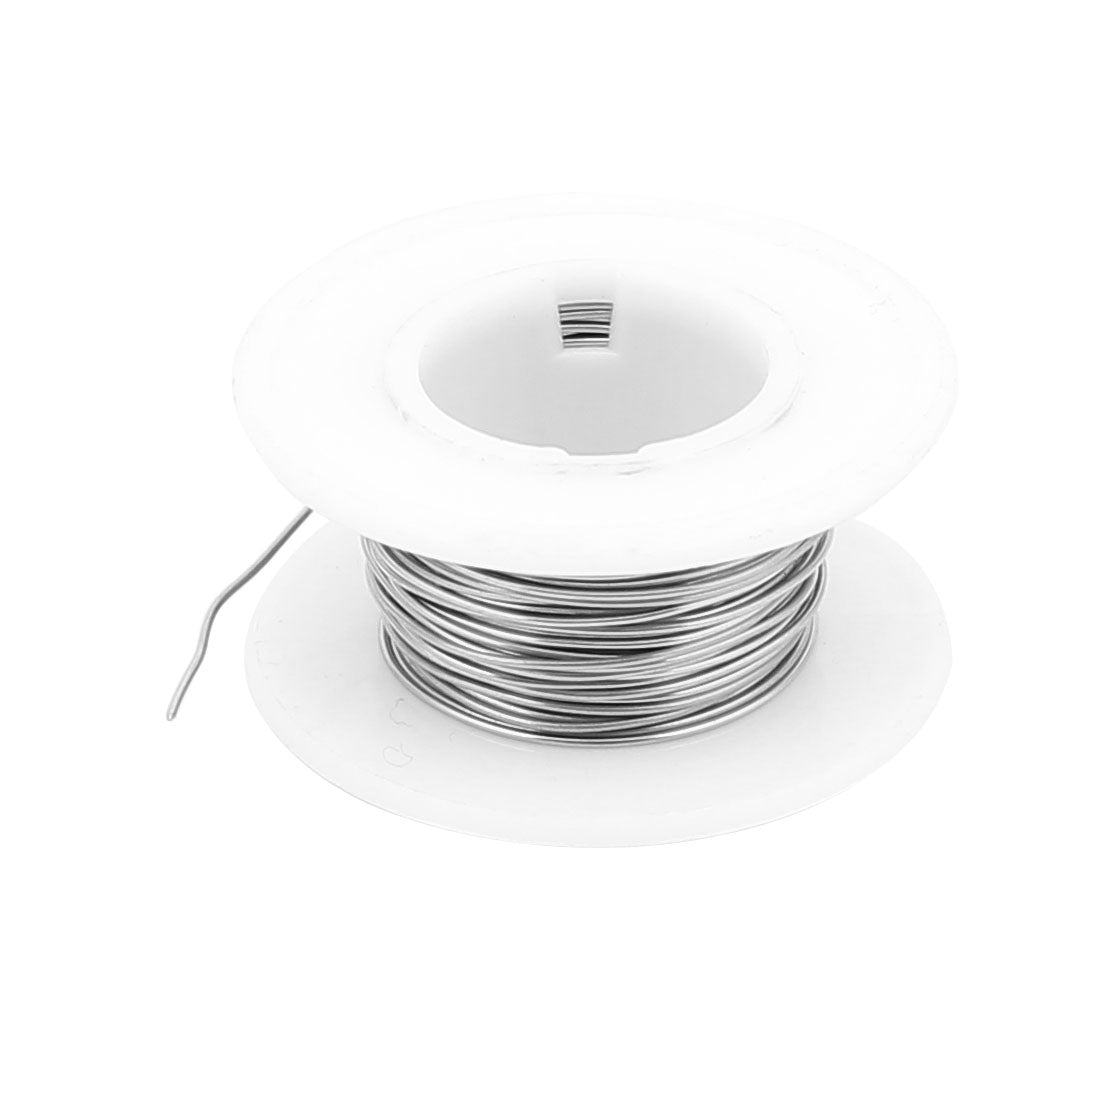 1.4mm 15AWG Heating Resistor Nichrome Wire for Heating Elements 16ft - 5m/16ft Length